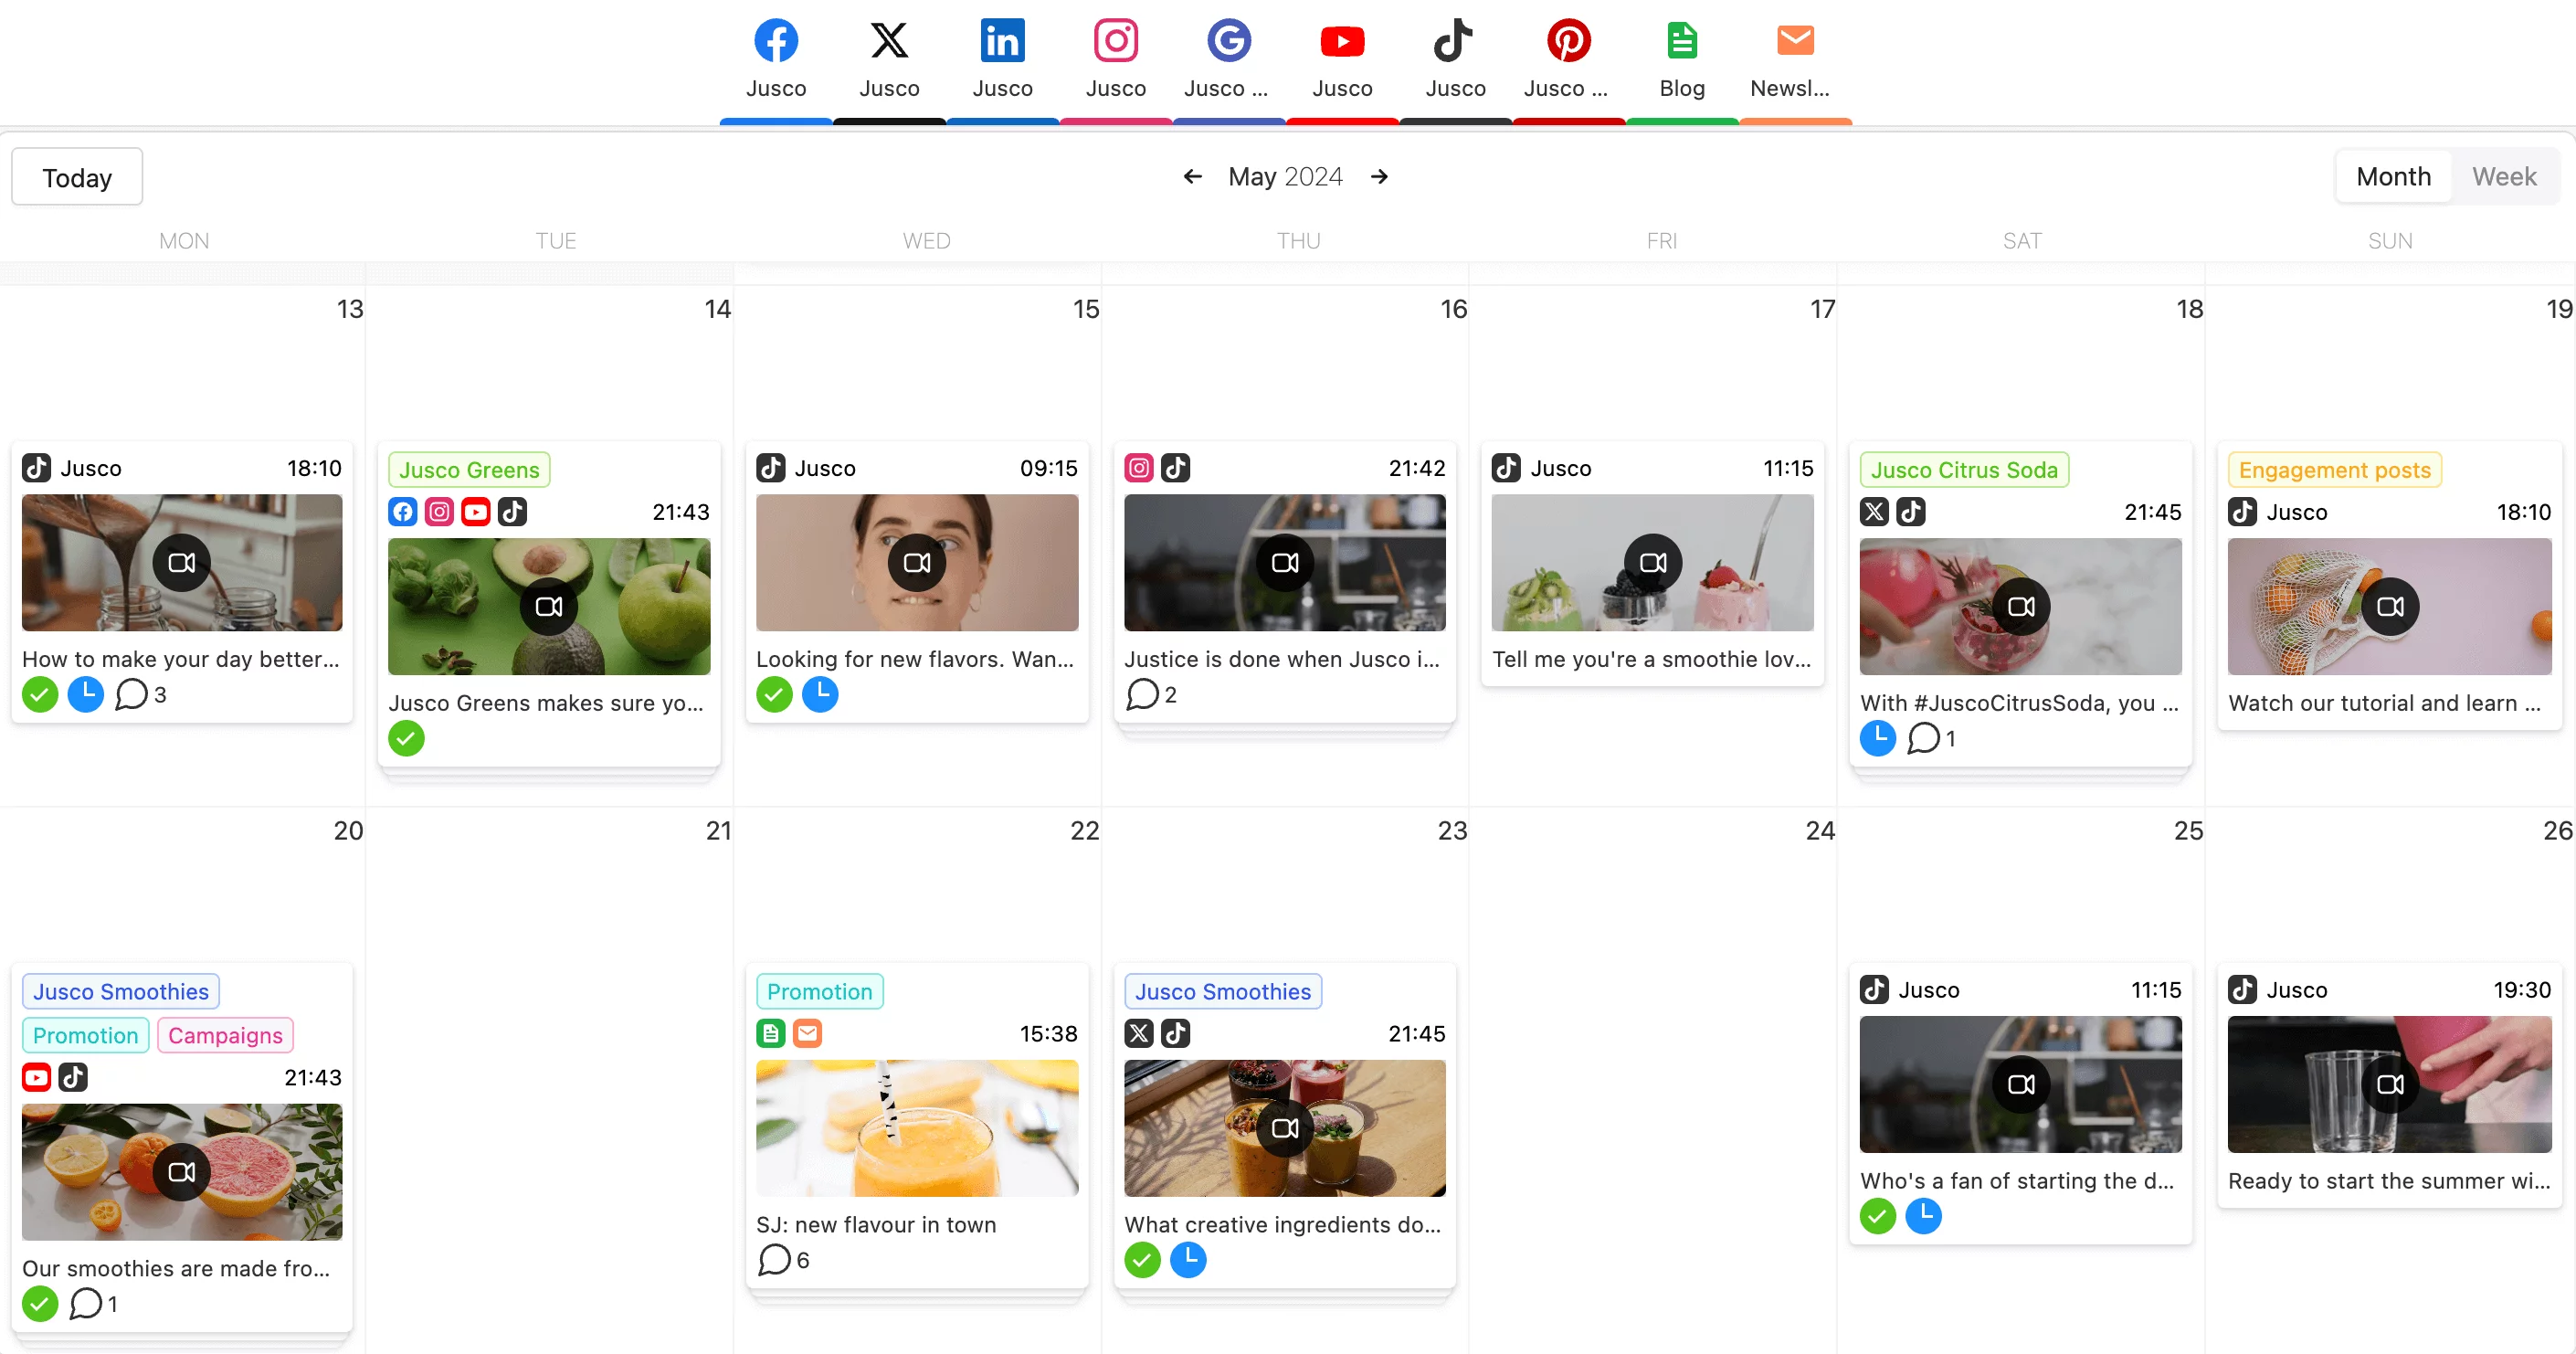 TikTok content calendar in Planable, with videos, captions, approval status, publishing status, and number of comments